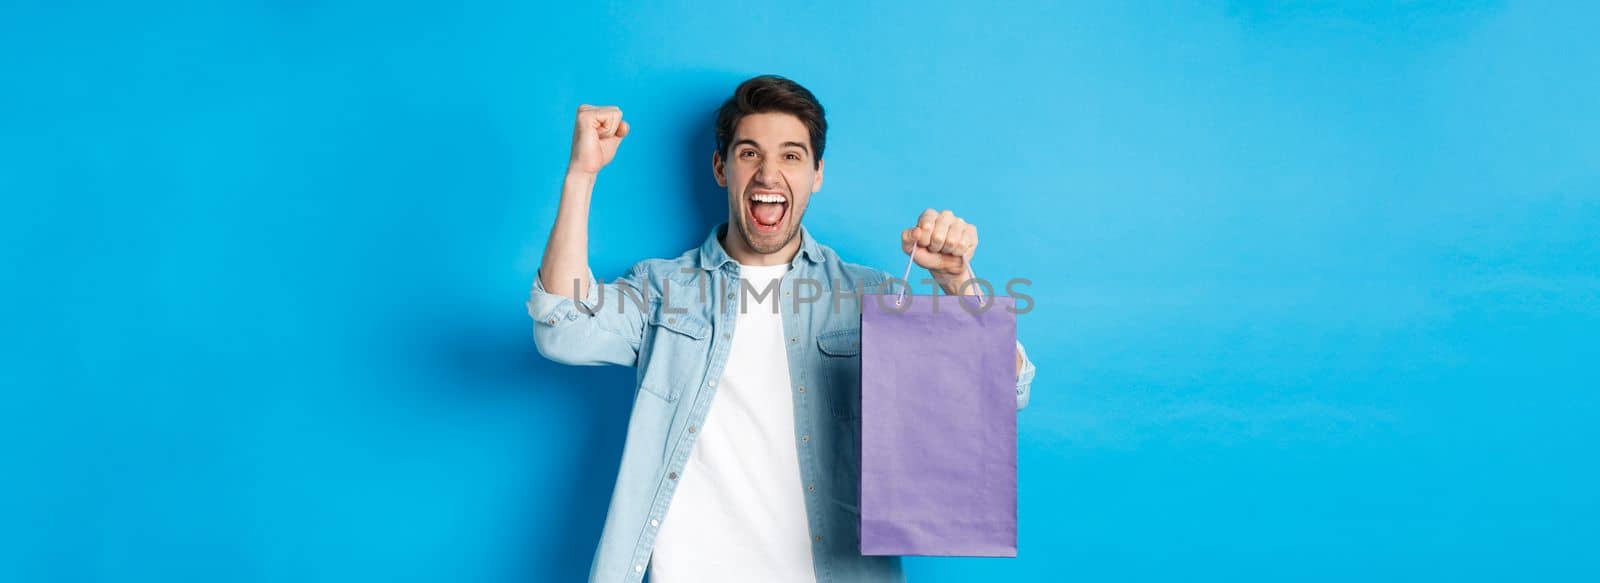 Concept of shopping, holidays and lifestyle. Cheerful young man celebrating, holding paper bag and making fist pump like winner, standing over blue background.